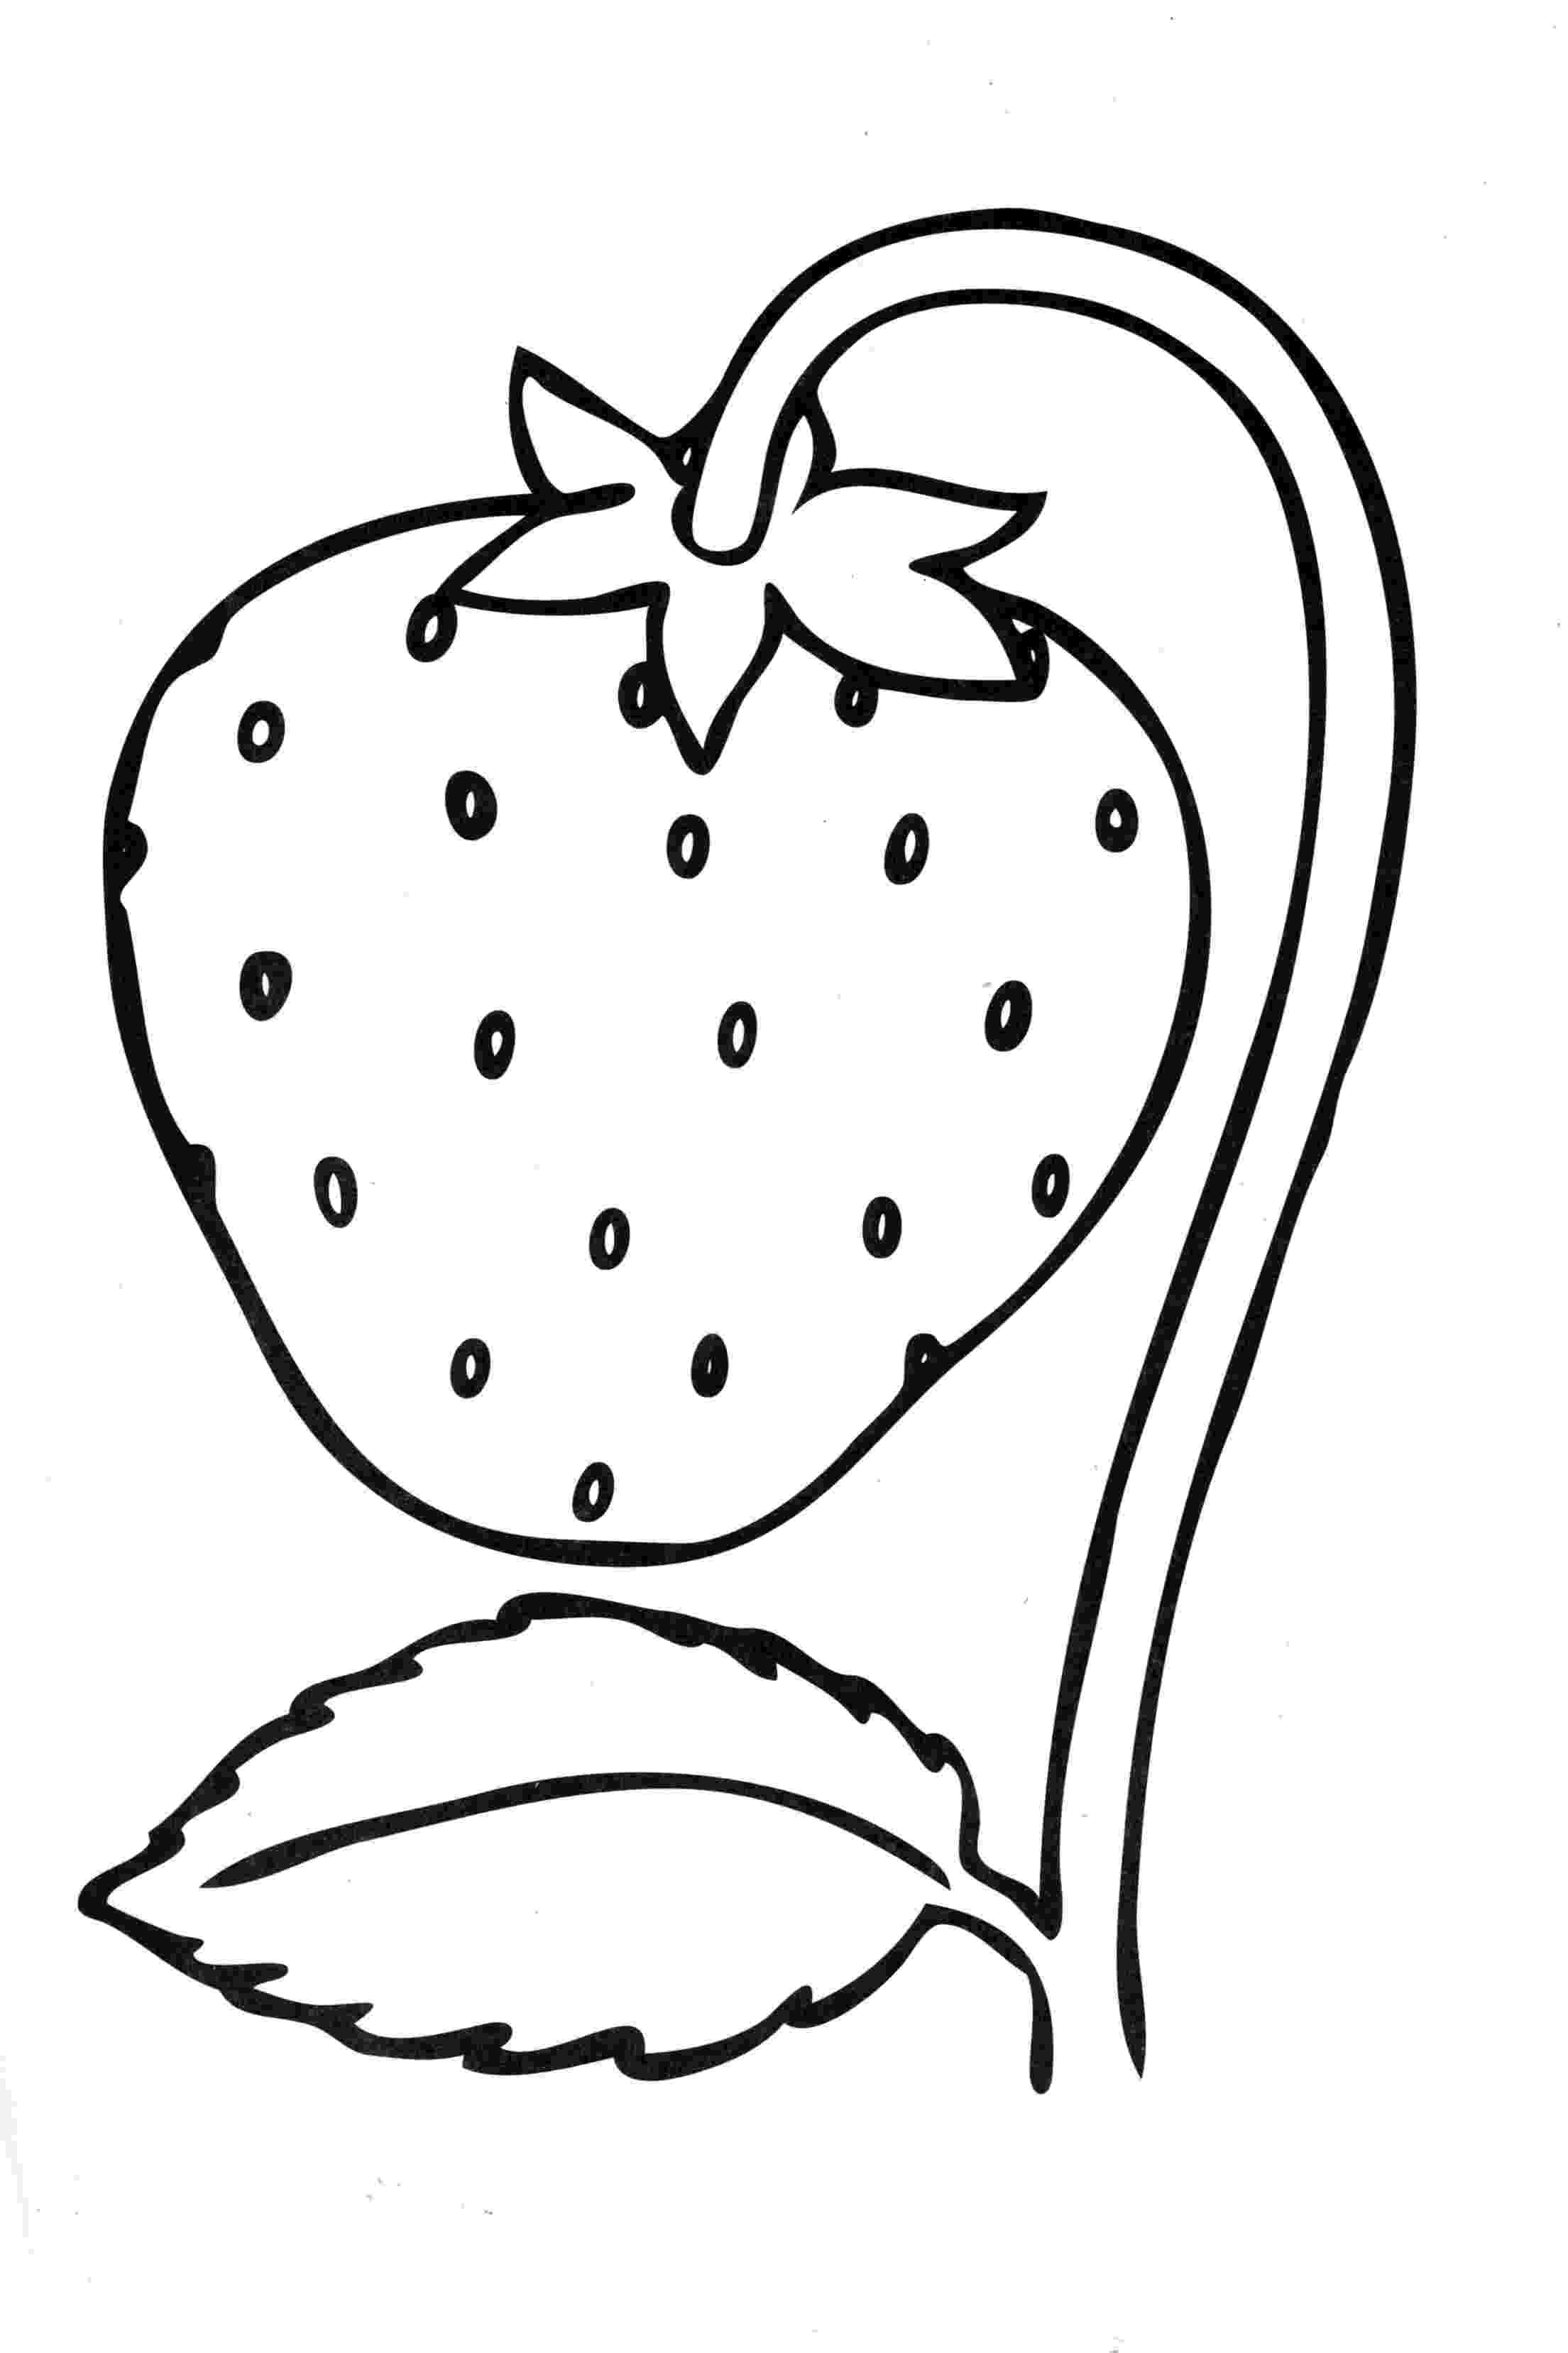 strawberry coloring pages strawberry coloring pages to download and print for free pages coloring strawberry 